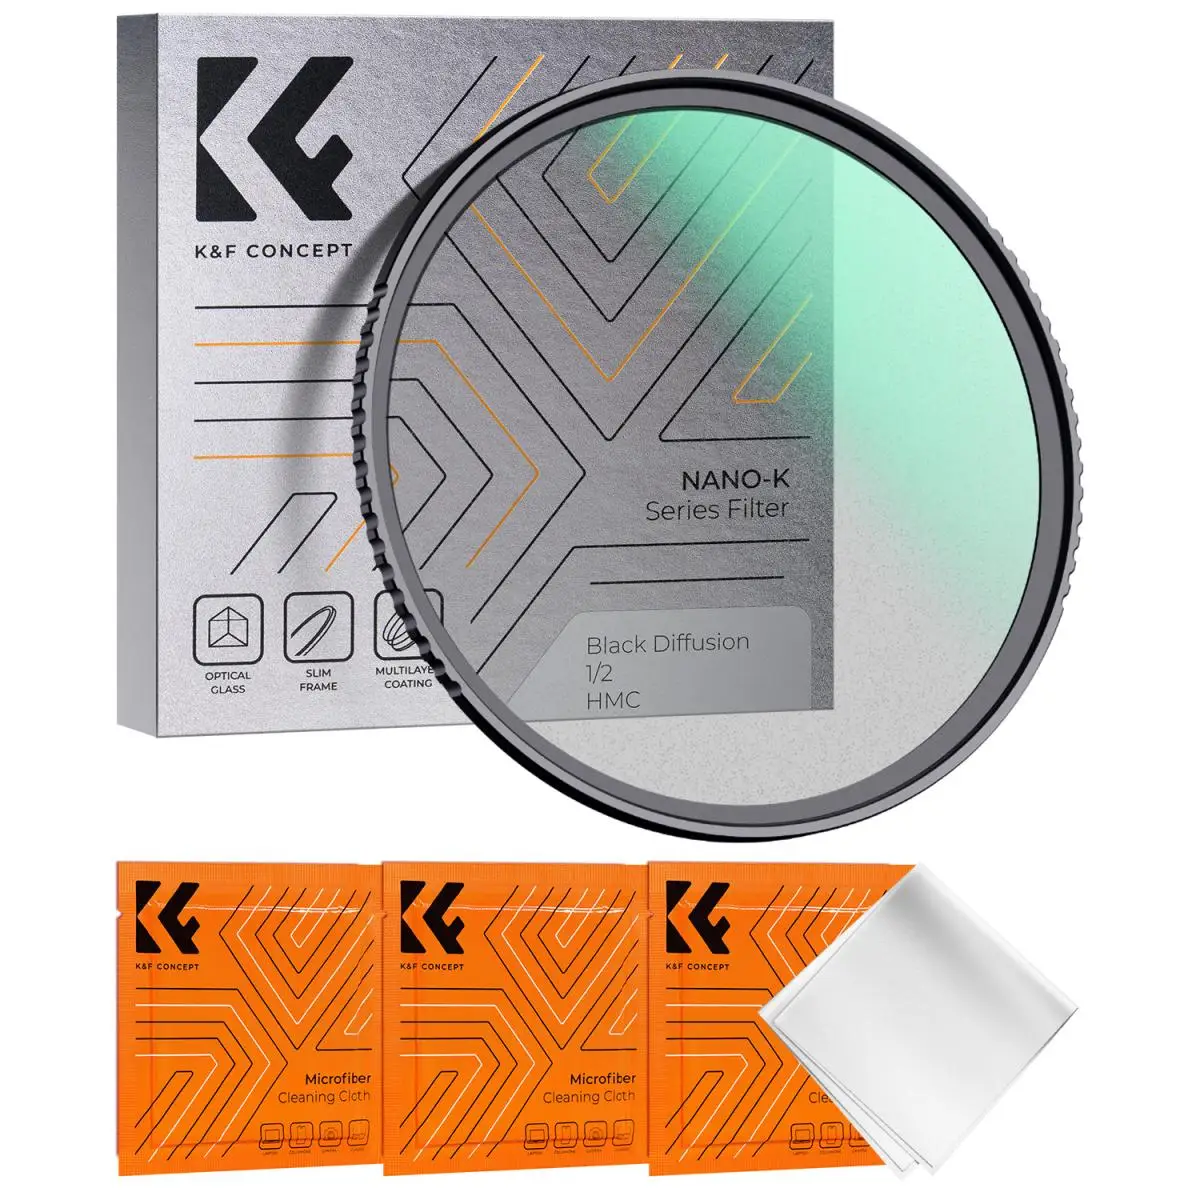 

K&F Concept Nano-K Series 72mm 77mm 82mm Black Diffusion 1/2 Filter Mist Cinematic Effect Filter with 18 Multi-Layer Coatings